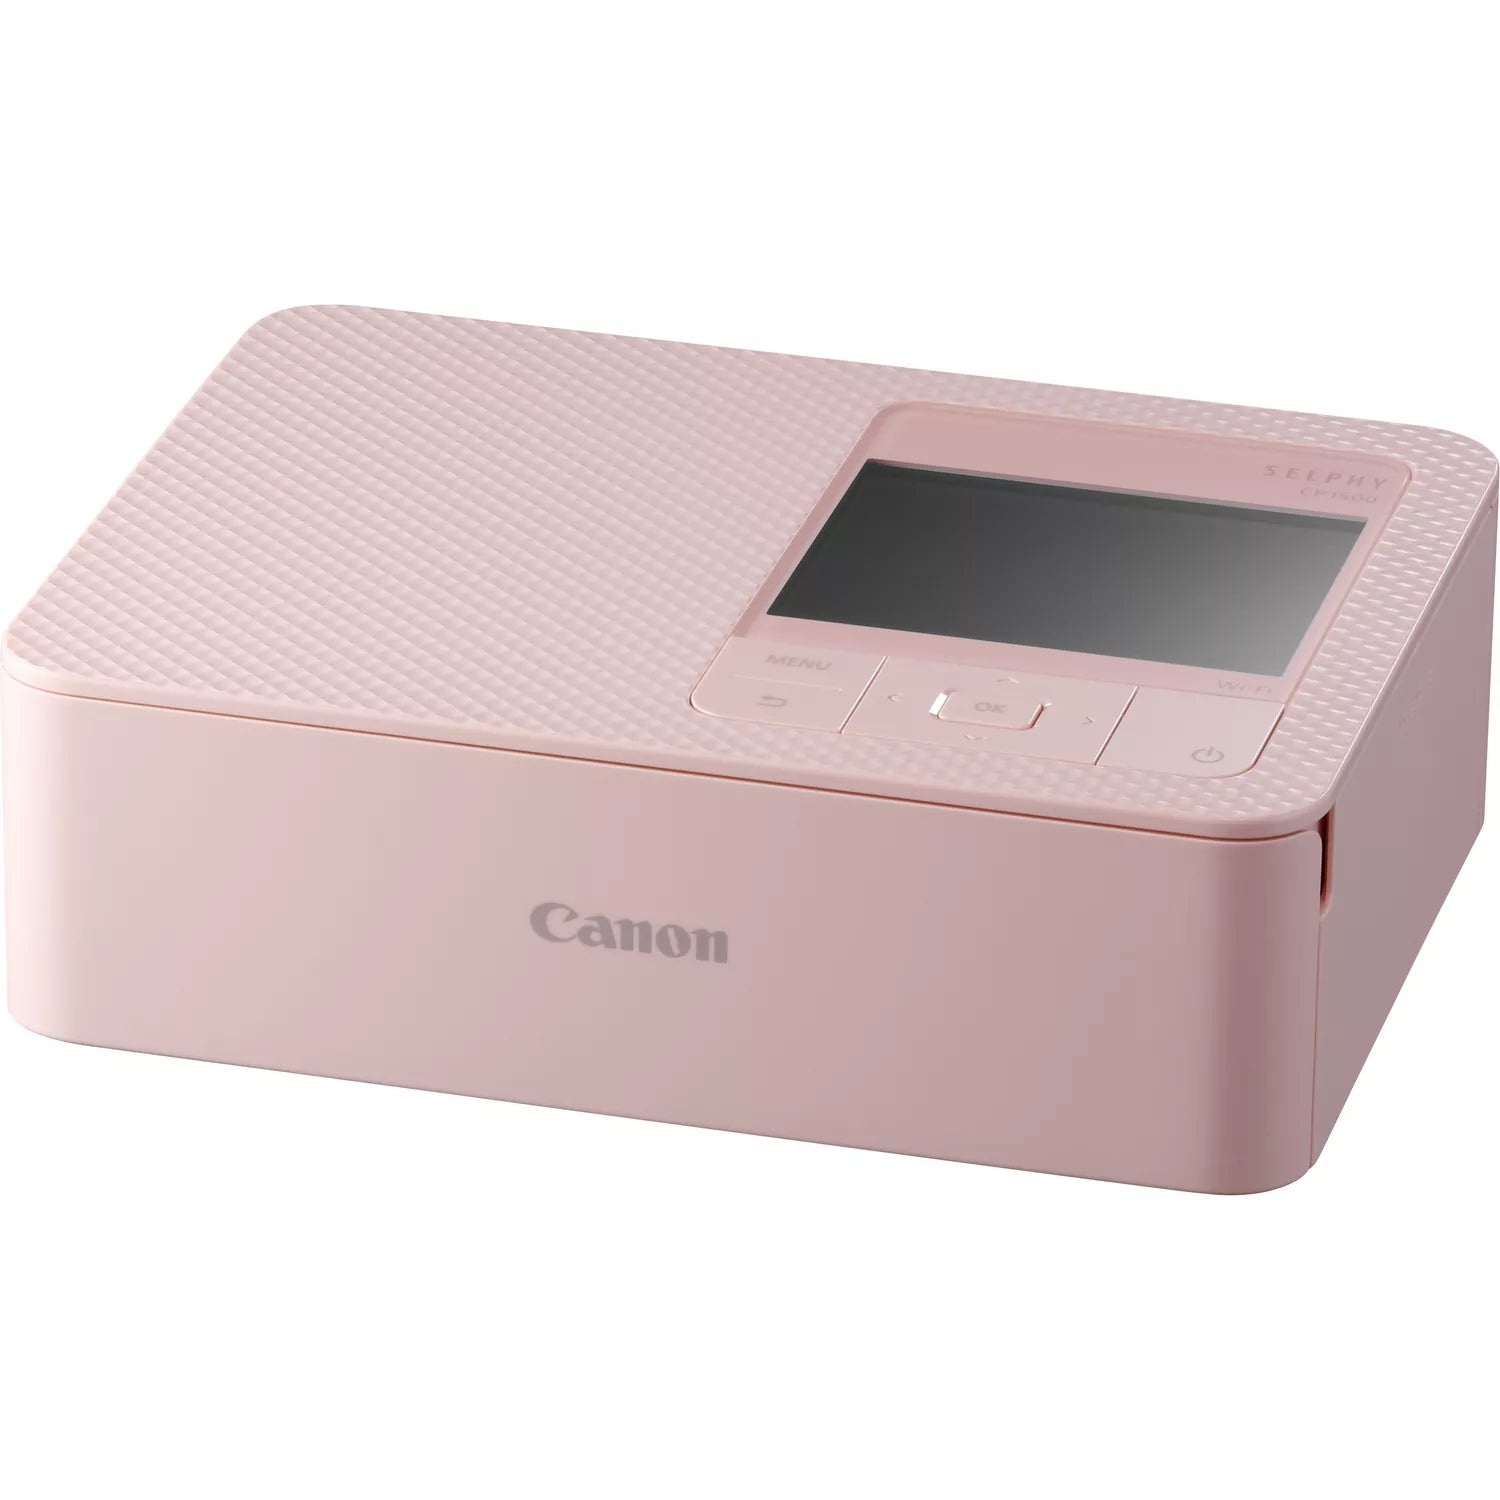 Clearance Canon SELPHY CP1500 Printer - Pink